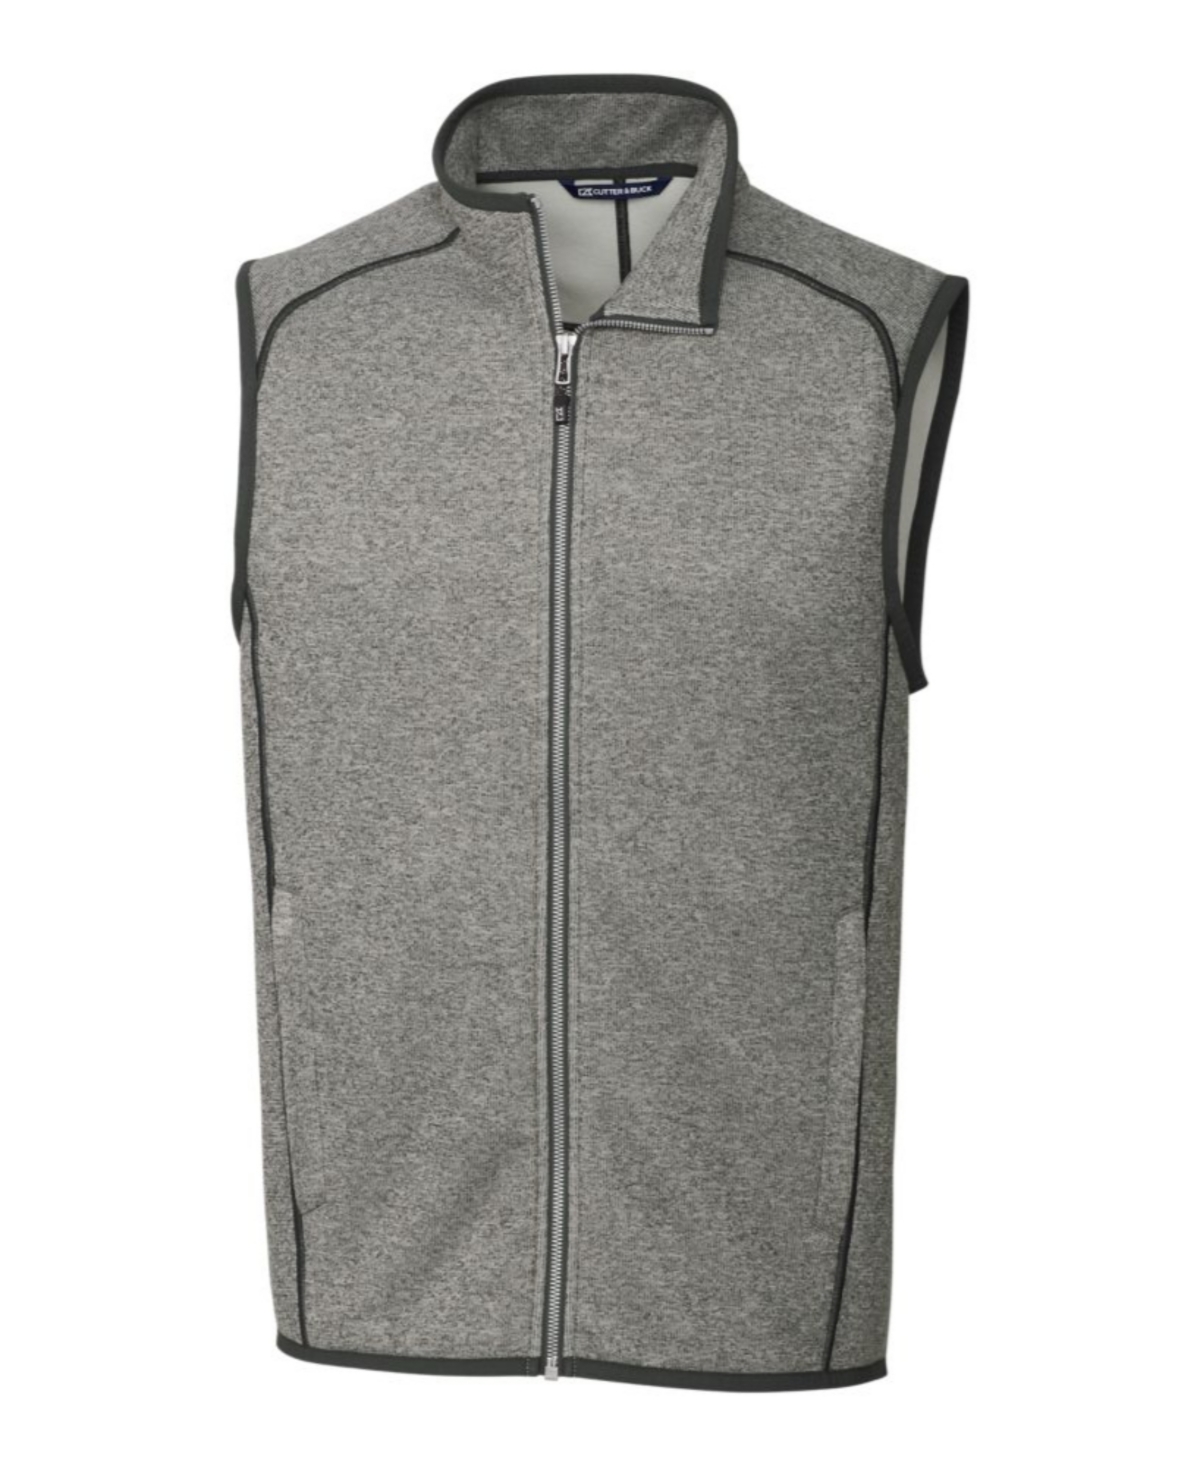 Cutter and Buck Men's Big and Tall Mainsail Sweater Vest - Heather Gray